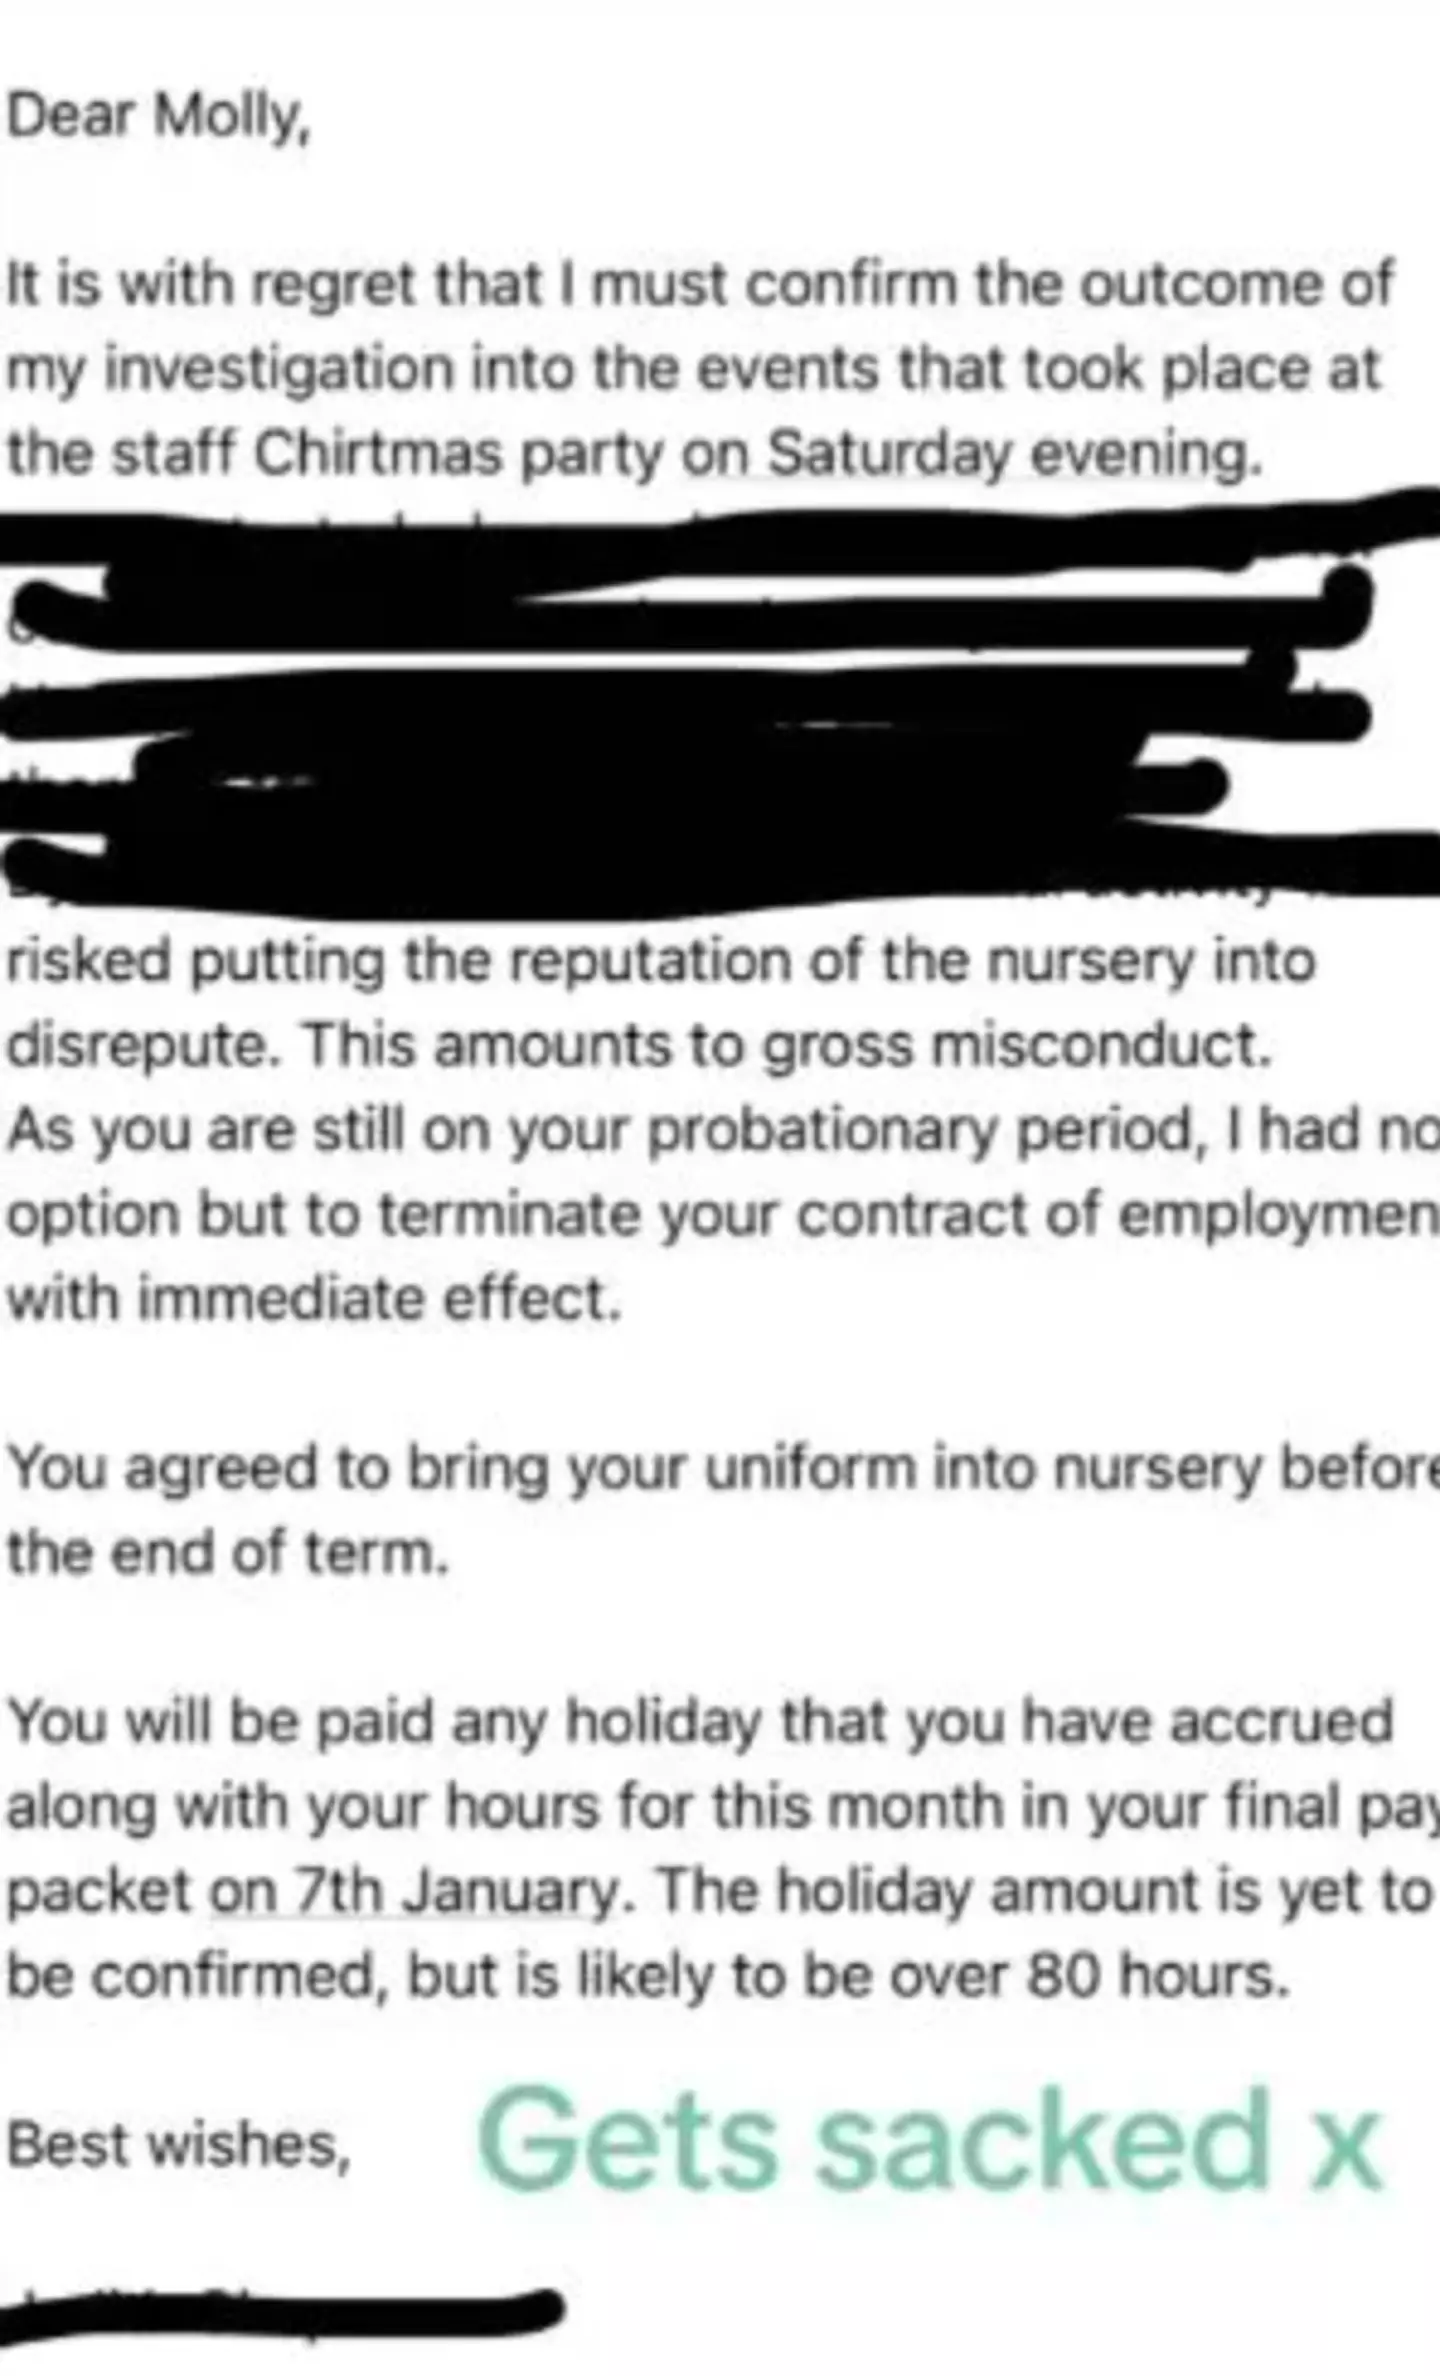 She shared an image of the email sent to her by her employers.